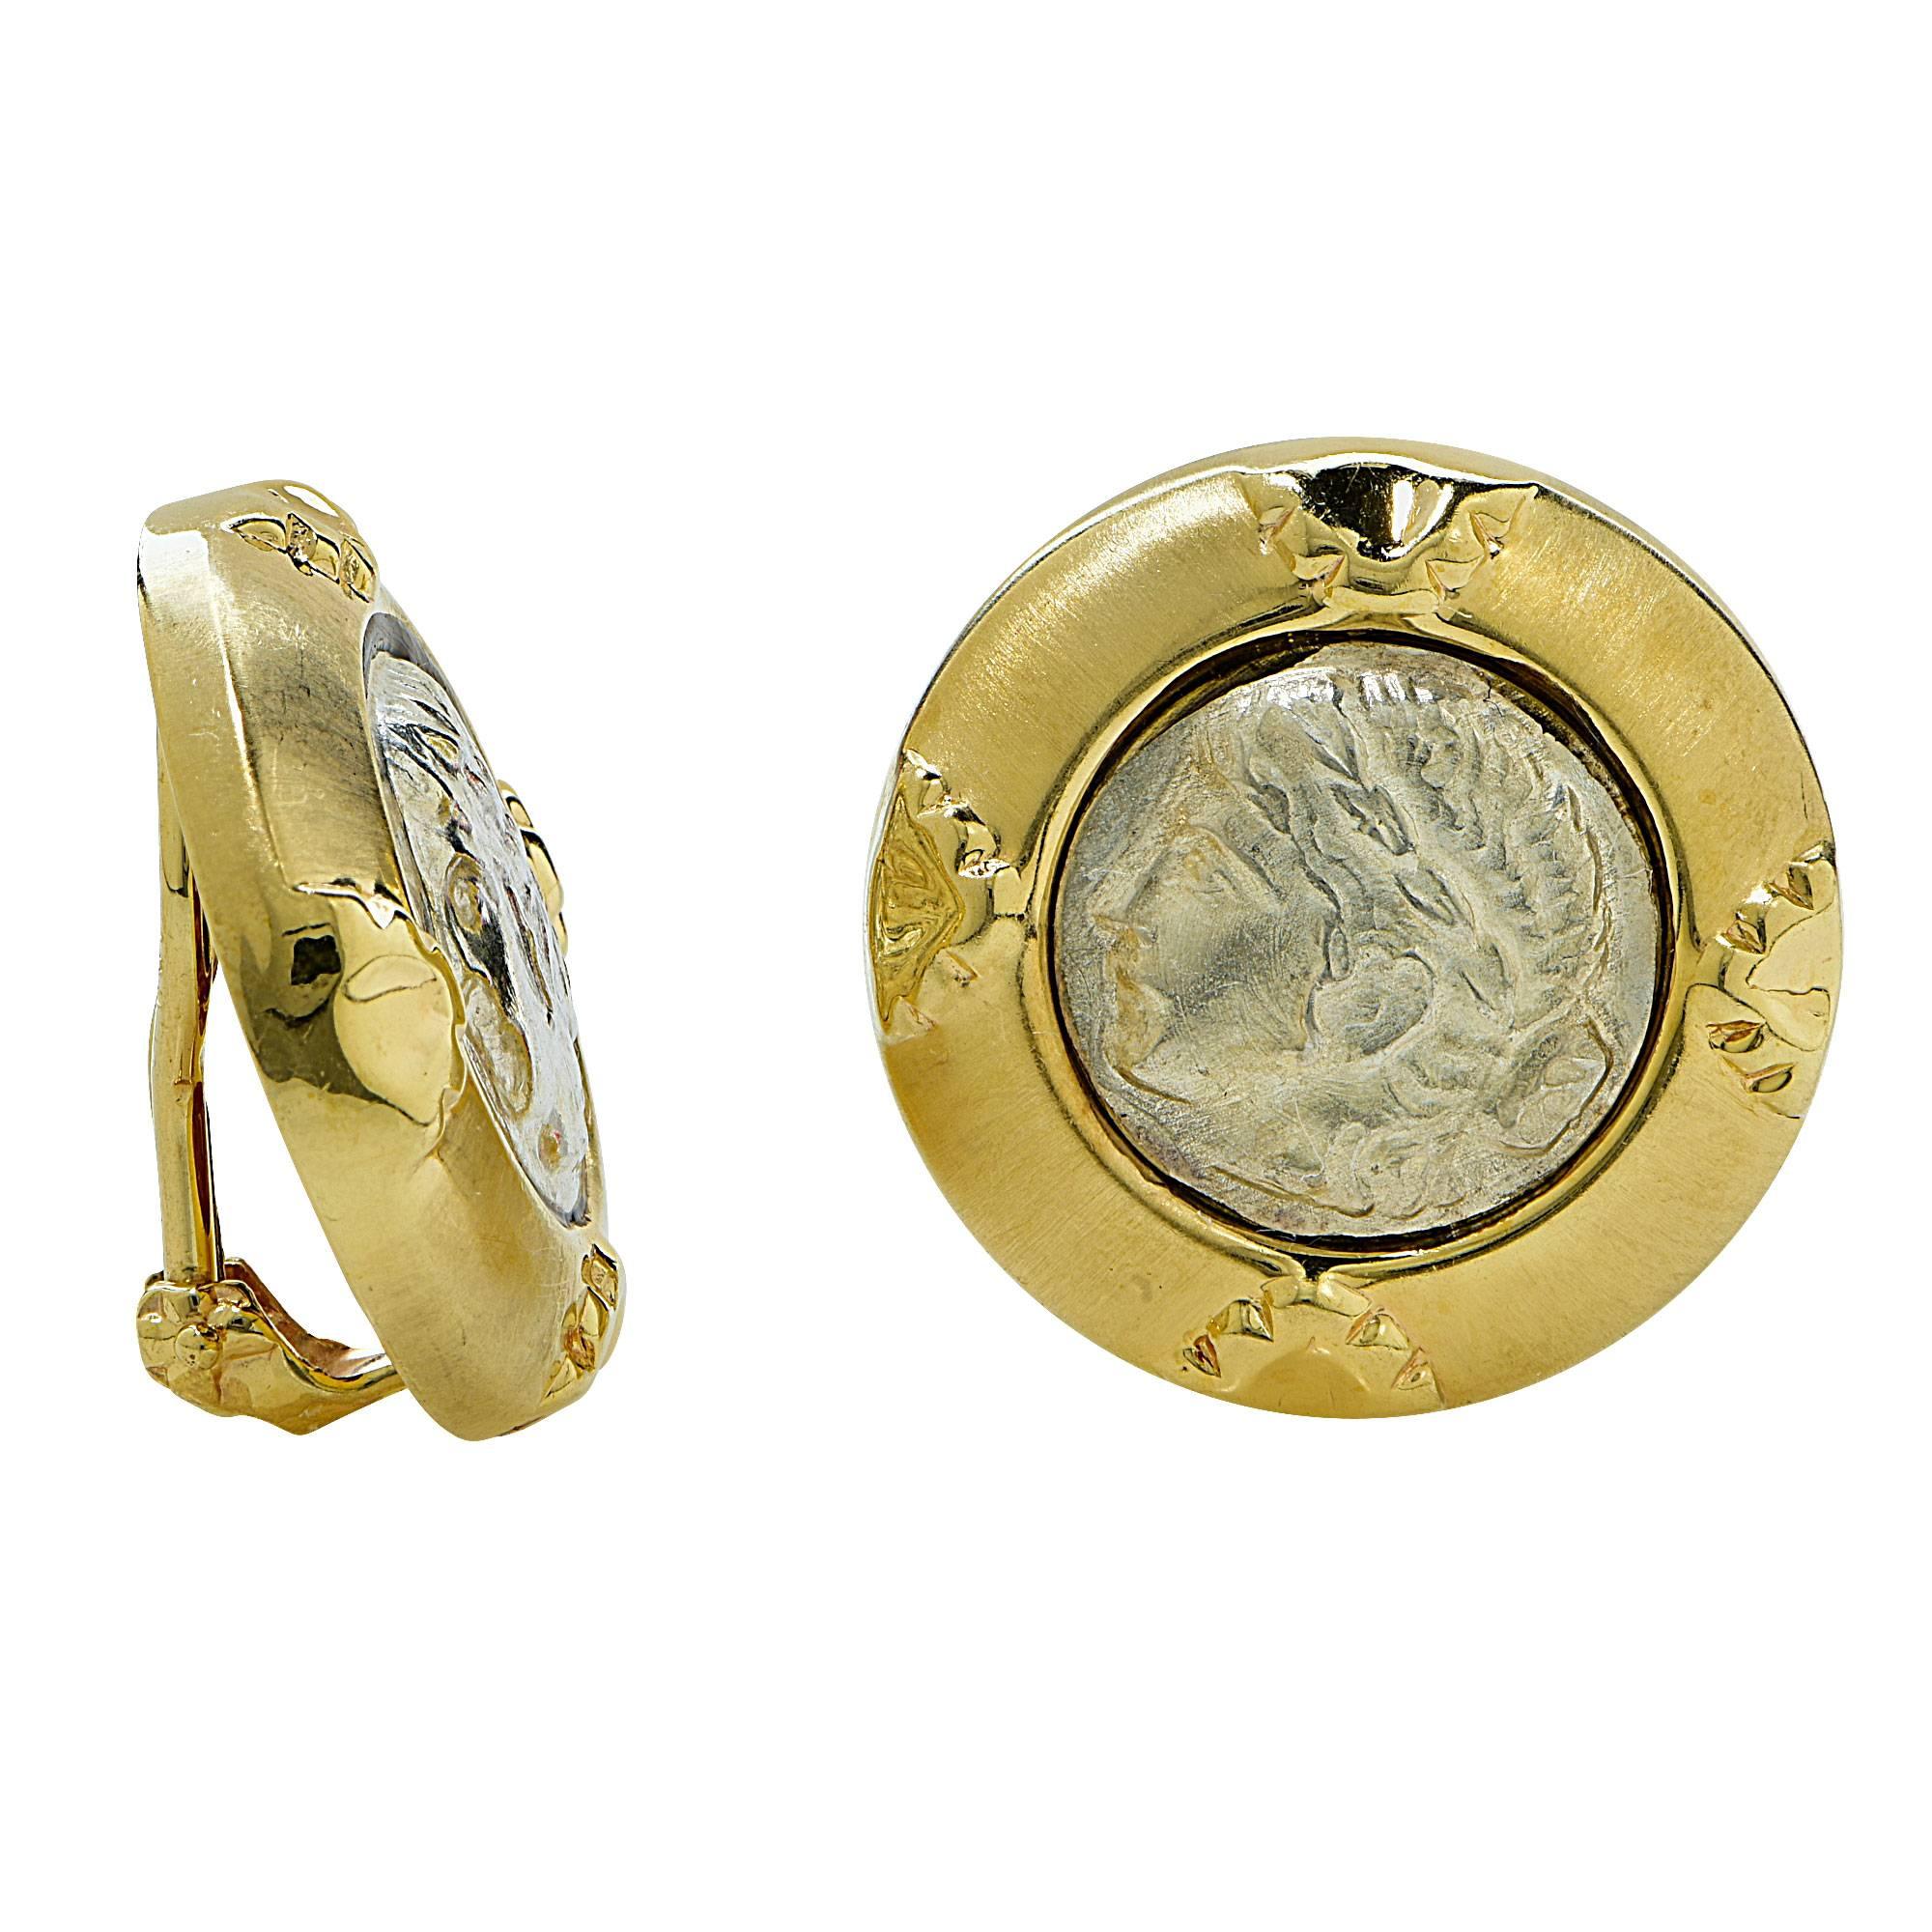 14k yellow gold roman style coin earrings.

Metal weight: 8.24 grams

These earrings are accompanied by a retail appraisal performed by a GIA Graduate Gemologist.